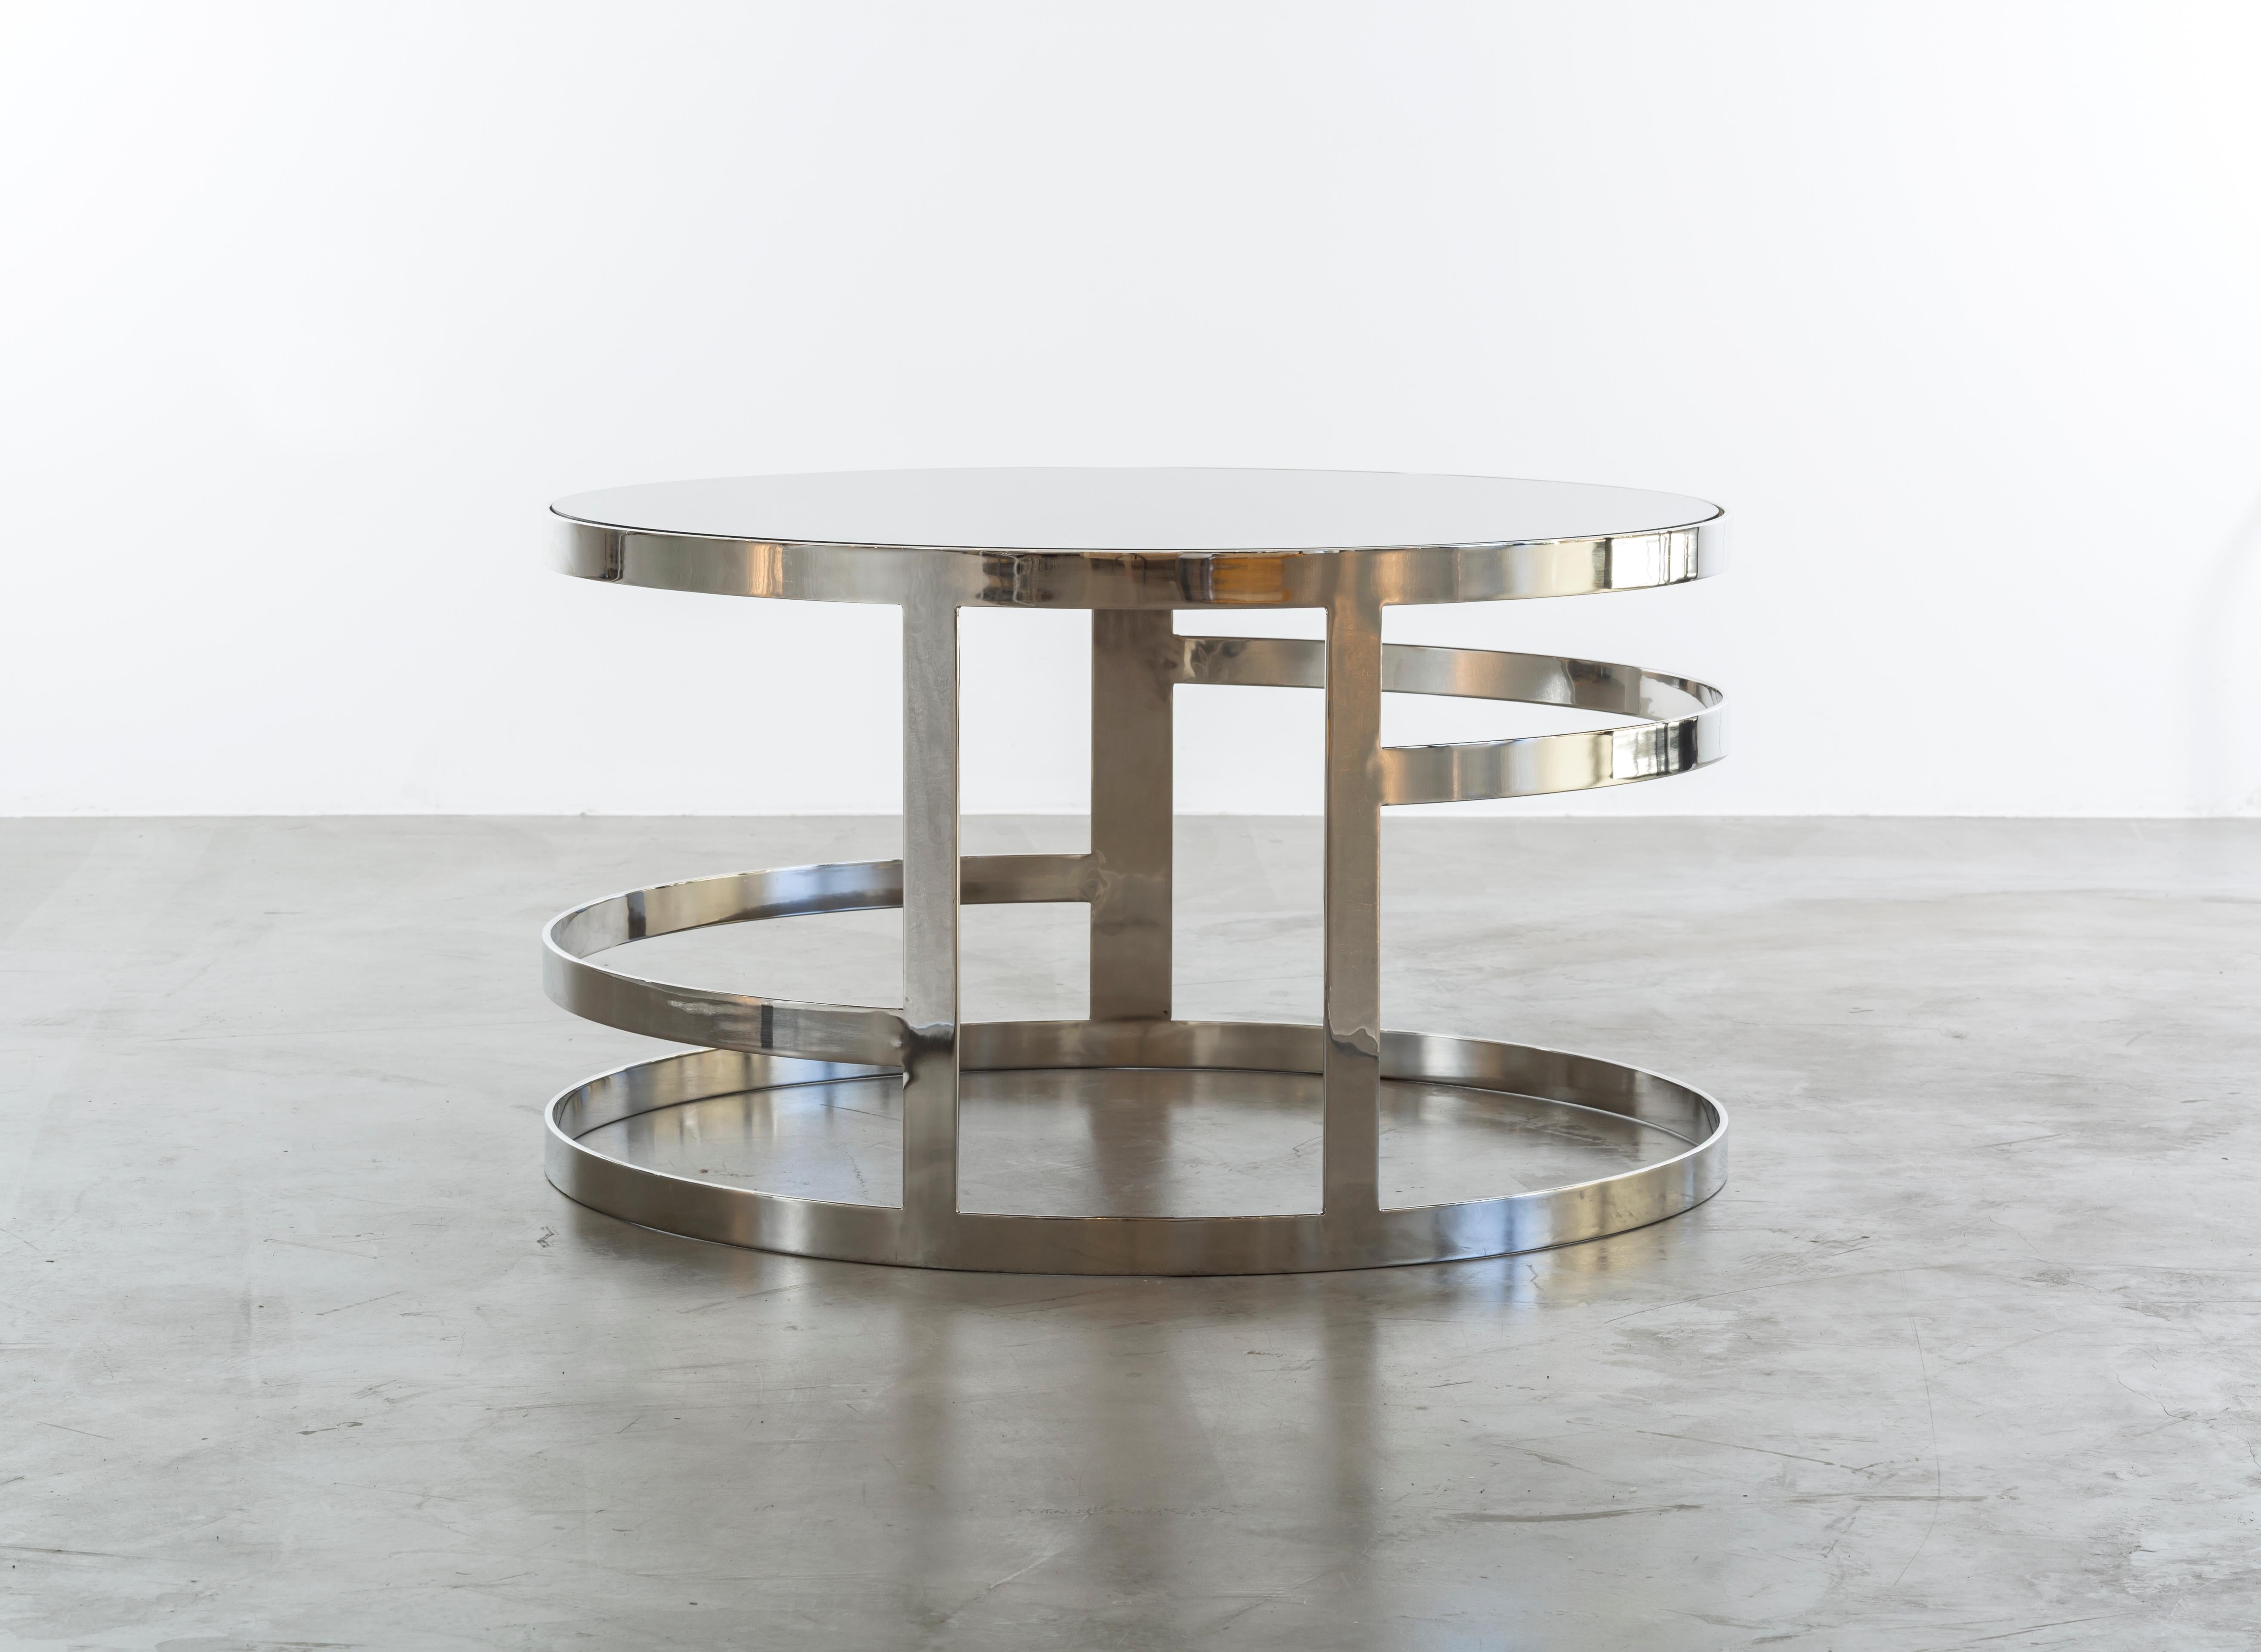 The Zoe coffee table is a modern coffee table in polished nickel with a smoked mirror top. Inspired by jewelry this coffee table is a real fashion statement for the home. Fully custom and made to order in California.